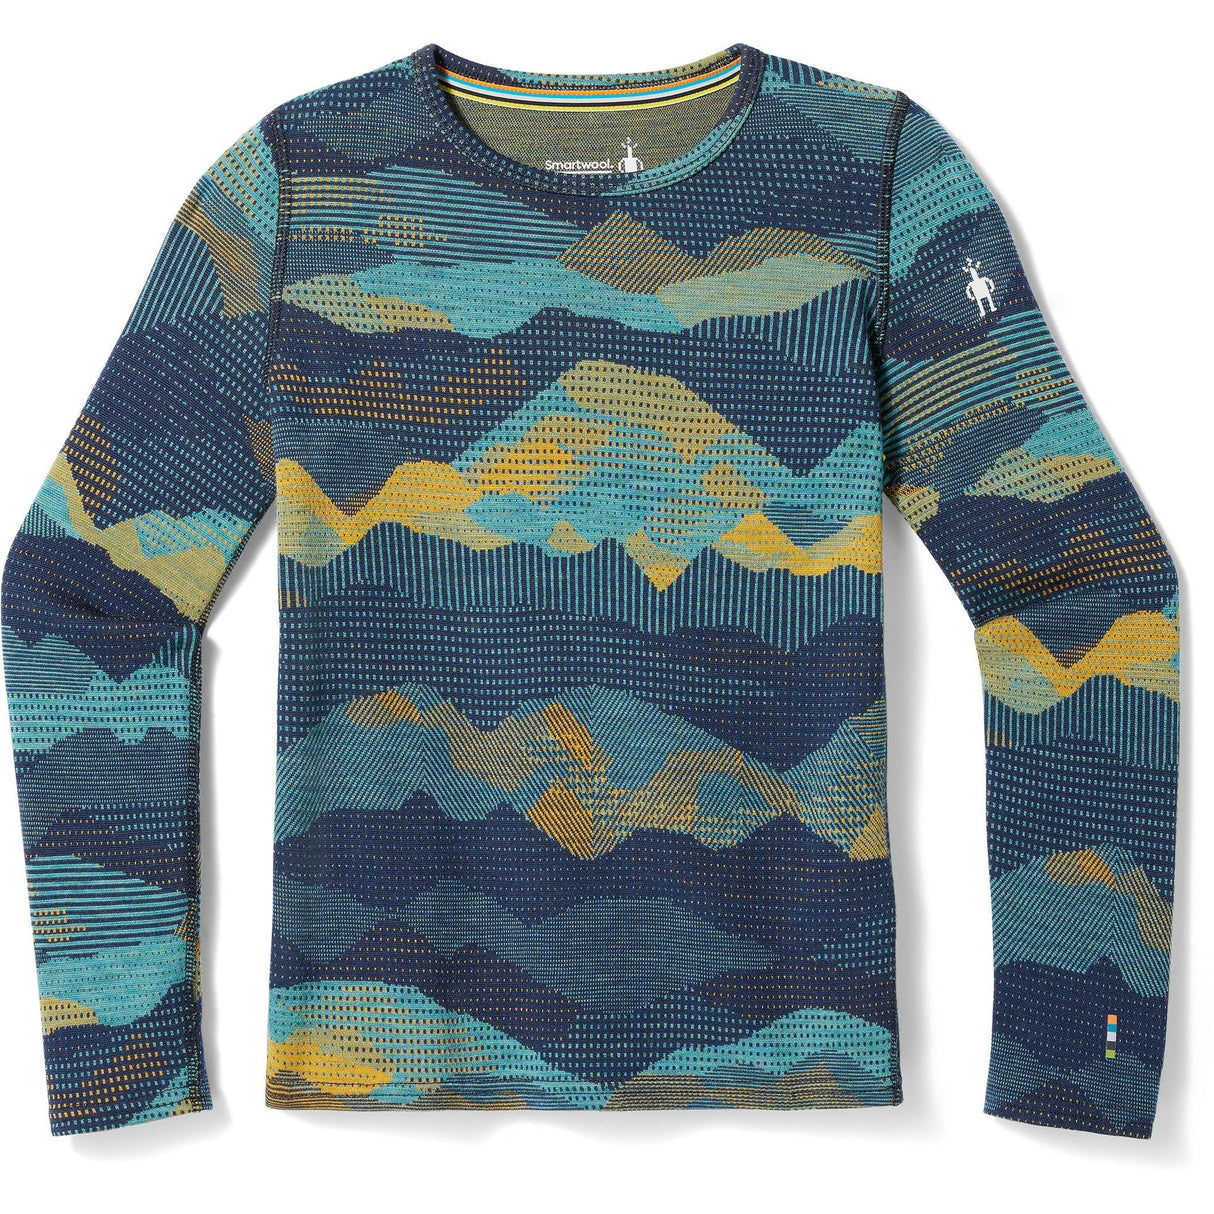 Smartwool Kids Classic Thermal Merino Base Layer Crew  -  XX-Small / Blueberry Mtn Scape